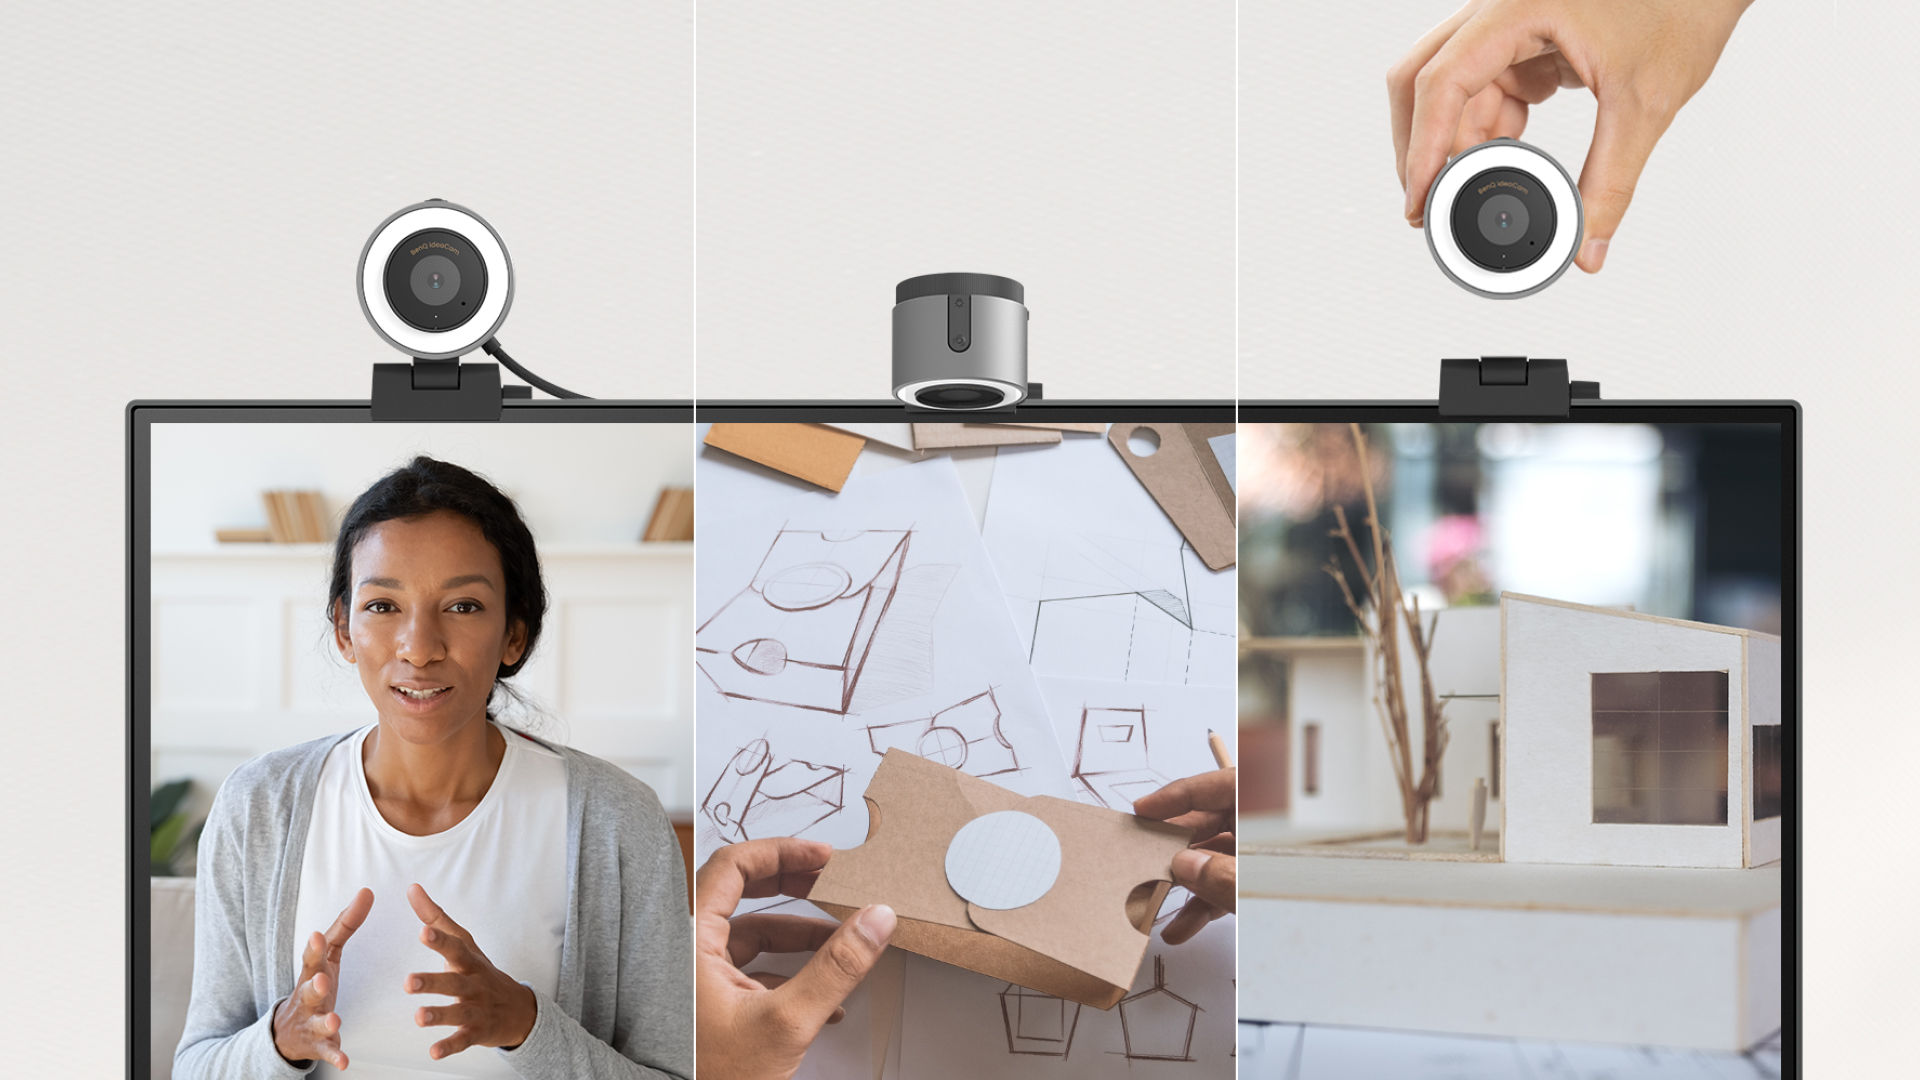 All In One Webcam Seamless Switch to Document Camera and